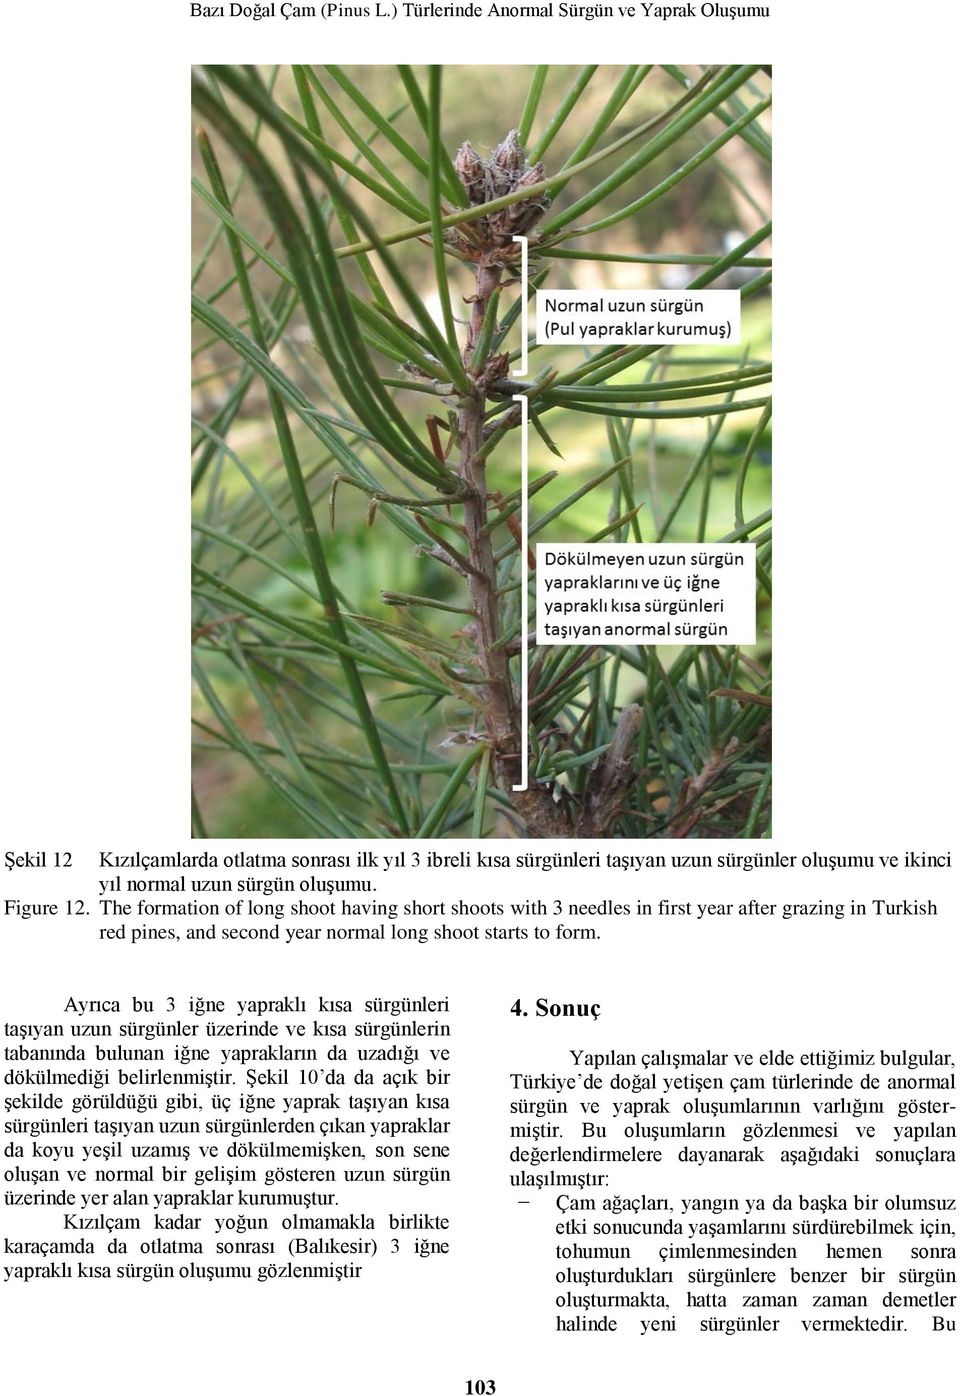 Figure 12. The formation of long shoot having short shoots with 3 needles in first year after grazing in Turkish red pines, and second year normal long shoot starts to form.